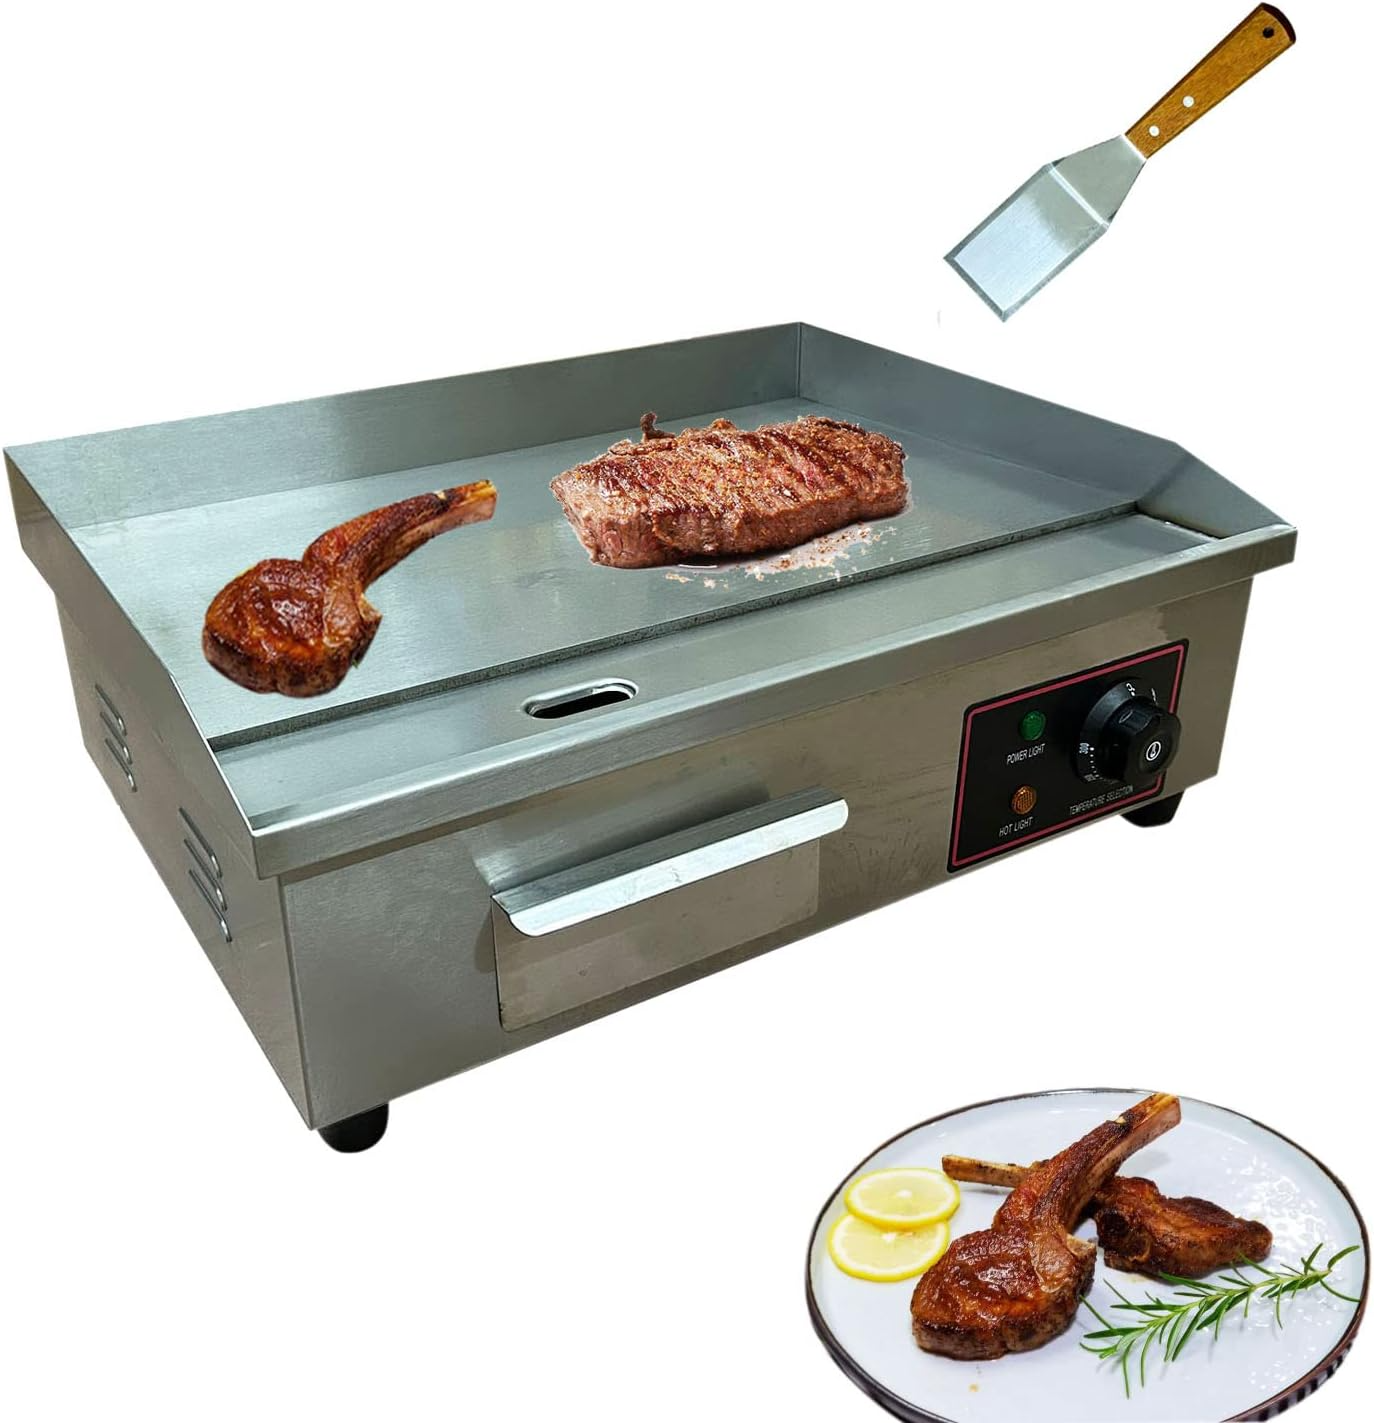 Proshopping 1600W 22" Extra Large Commercial Electric Countertop Griddle Grill, Flat Top Grill Indoor, Stainless Steel Restaurant Grill, Tabletop Flat Grill - for BBQ, Pancake, Chicken (110V) - Barbecue Whizz...Watch My Smoke!